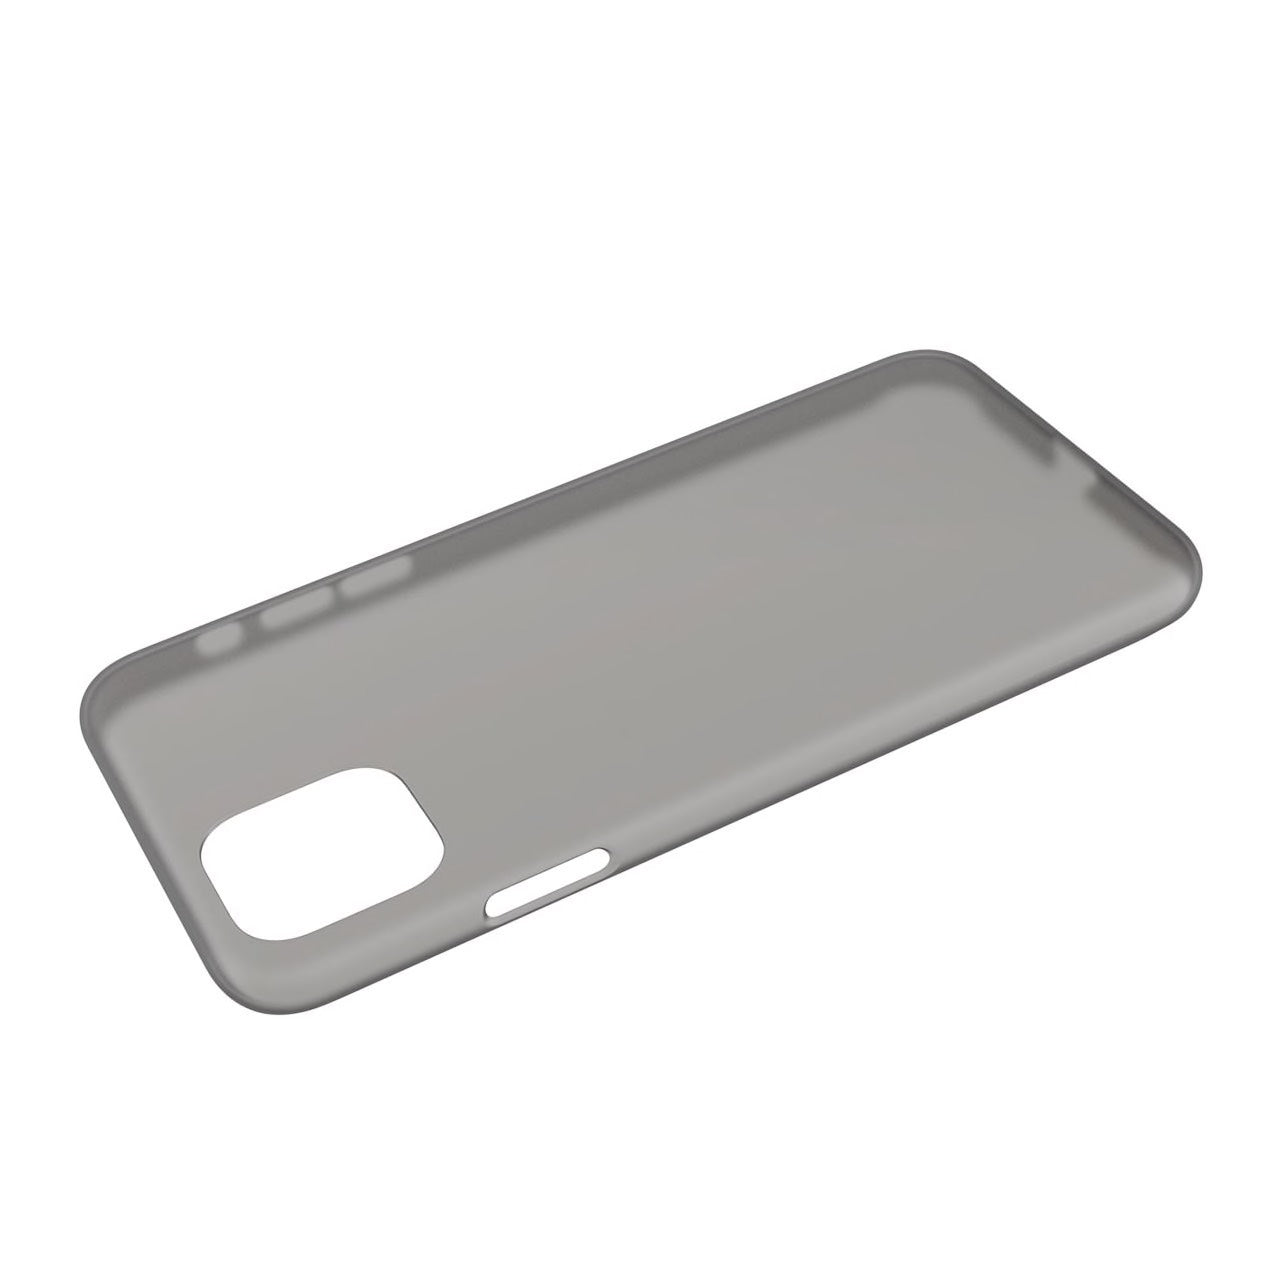 Air Jacket for iPhone 11 Pro Max - Smoke Matte